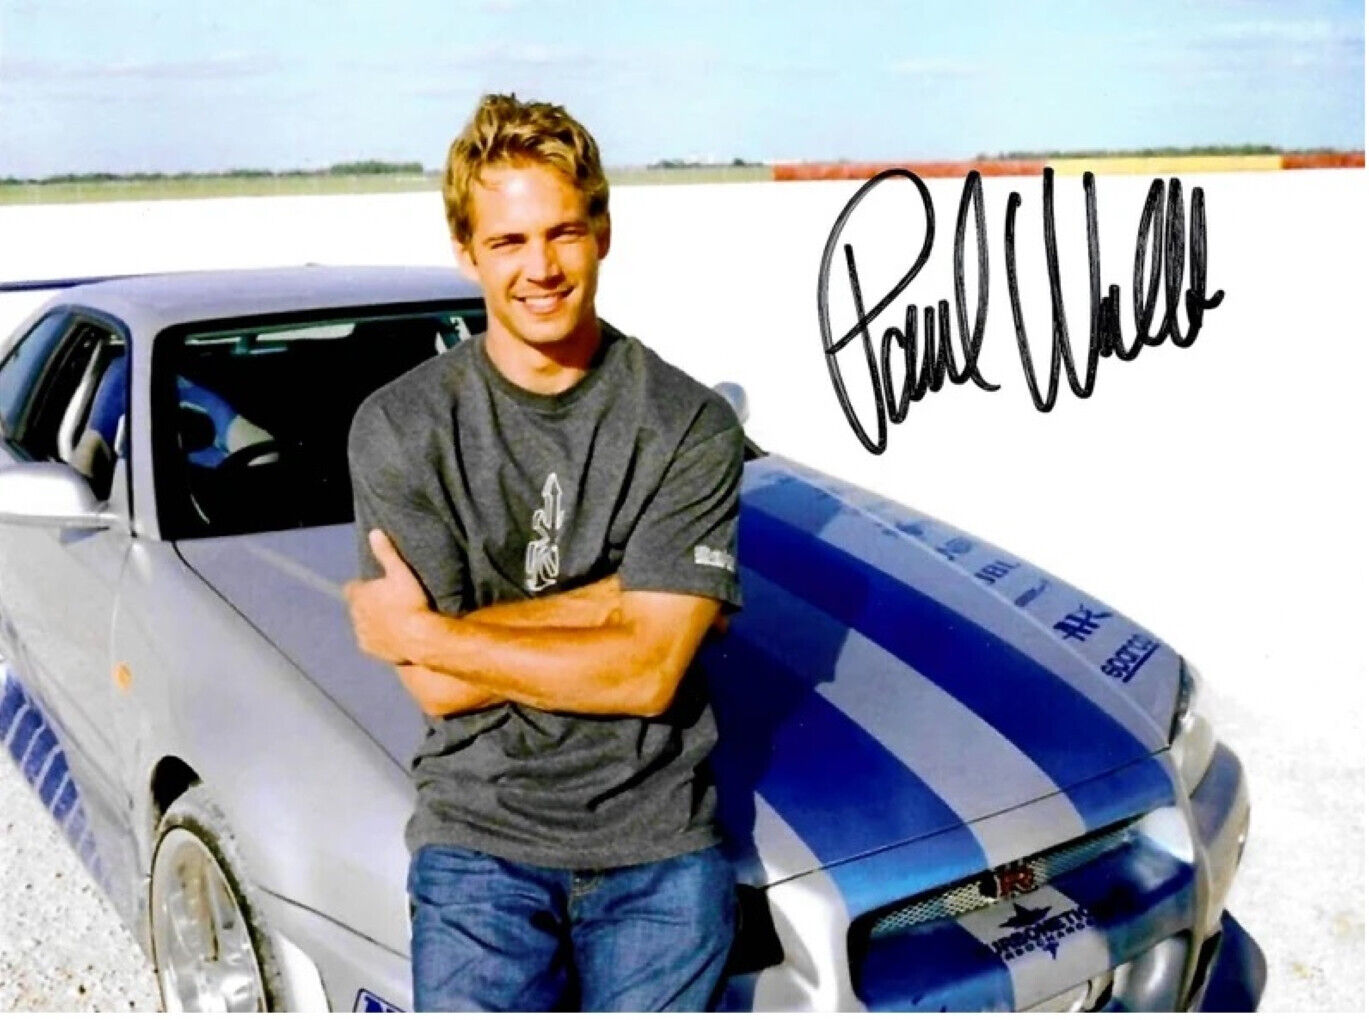 Paul Walker Fast and Furious signed 8.5x11 Signed Photo Reprint